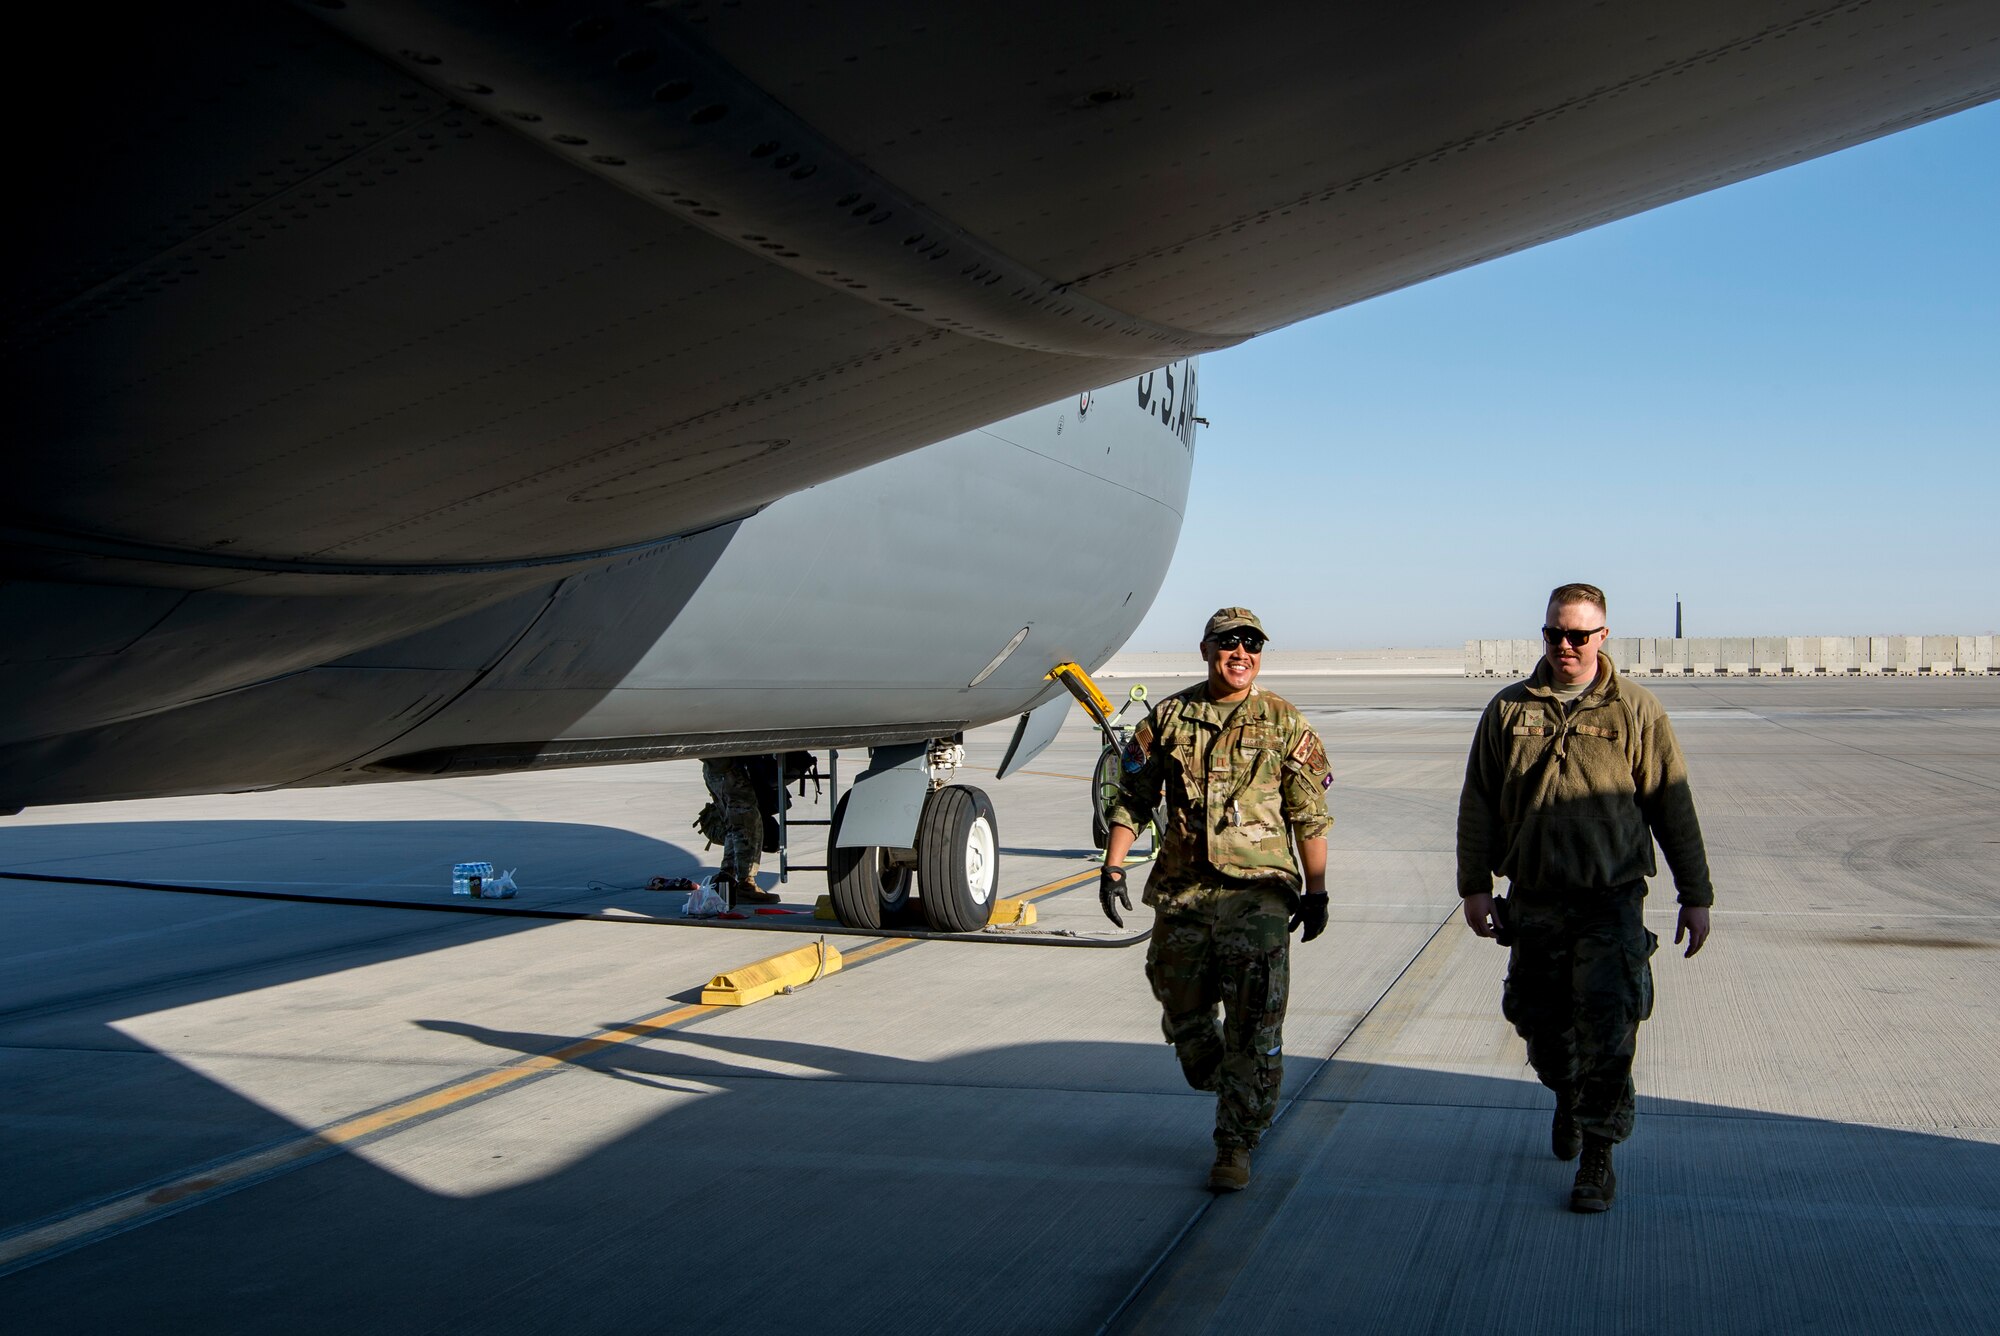 U.S. Air Force pilot assigned to the 28th Expeditionary Air Refueling Squadron, left, and a U.S. Air Force crew chief assigned to the 385th Expeditionary Aircraft Maintenance perform a preflight inspection on a KC-135 Stratotanker at Al Udeid Air Base, Qatar, Jan. 14, 2020.